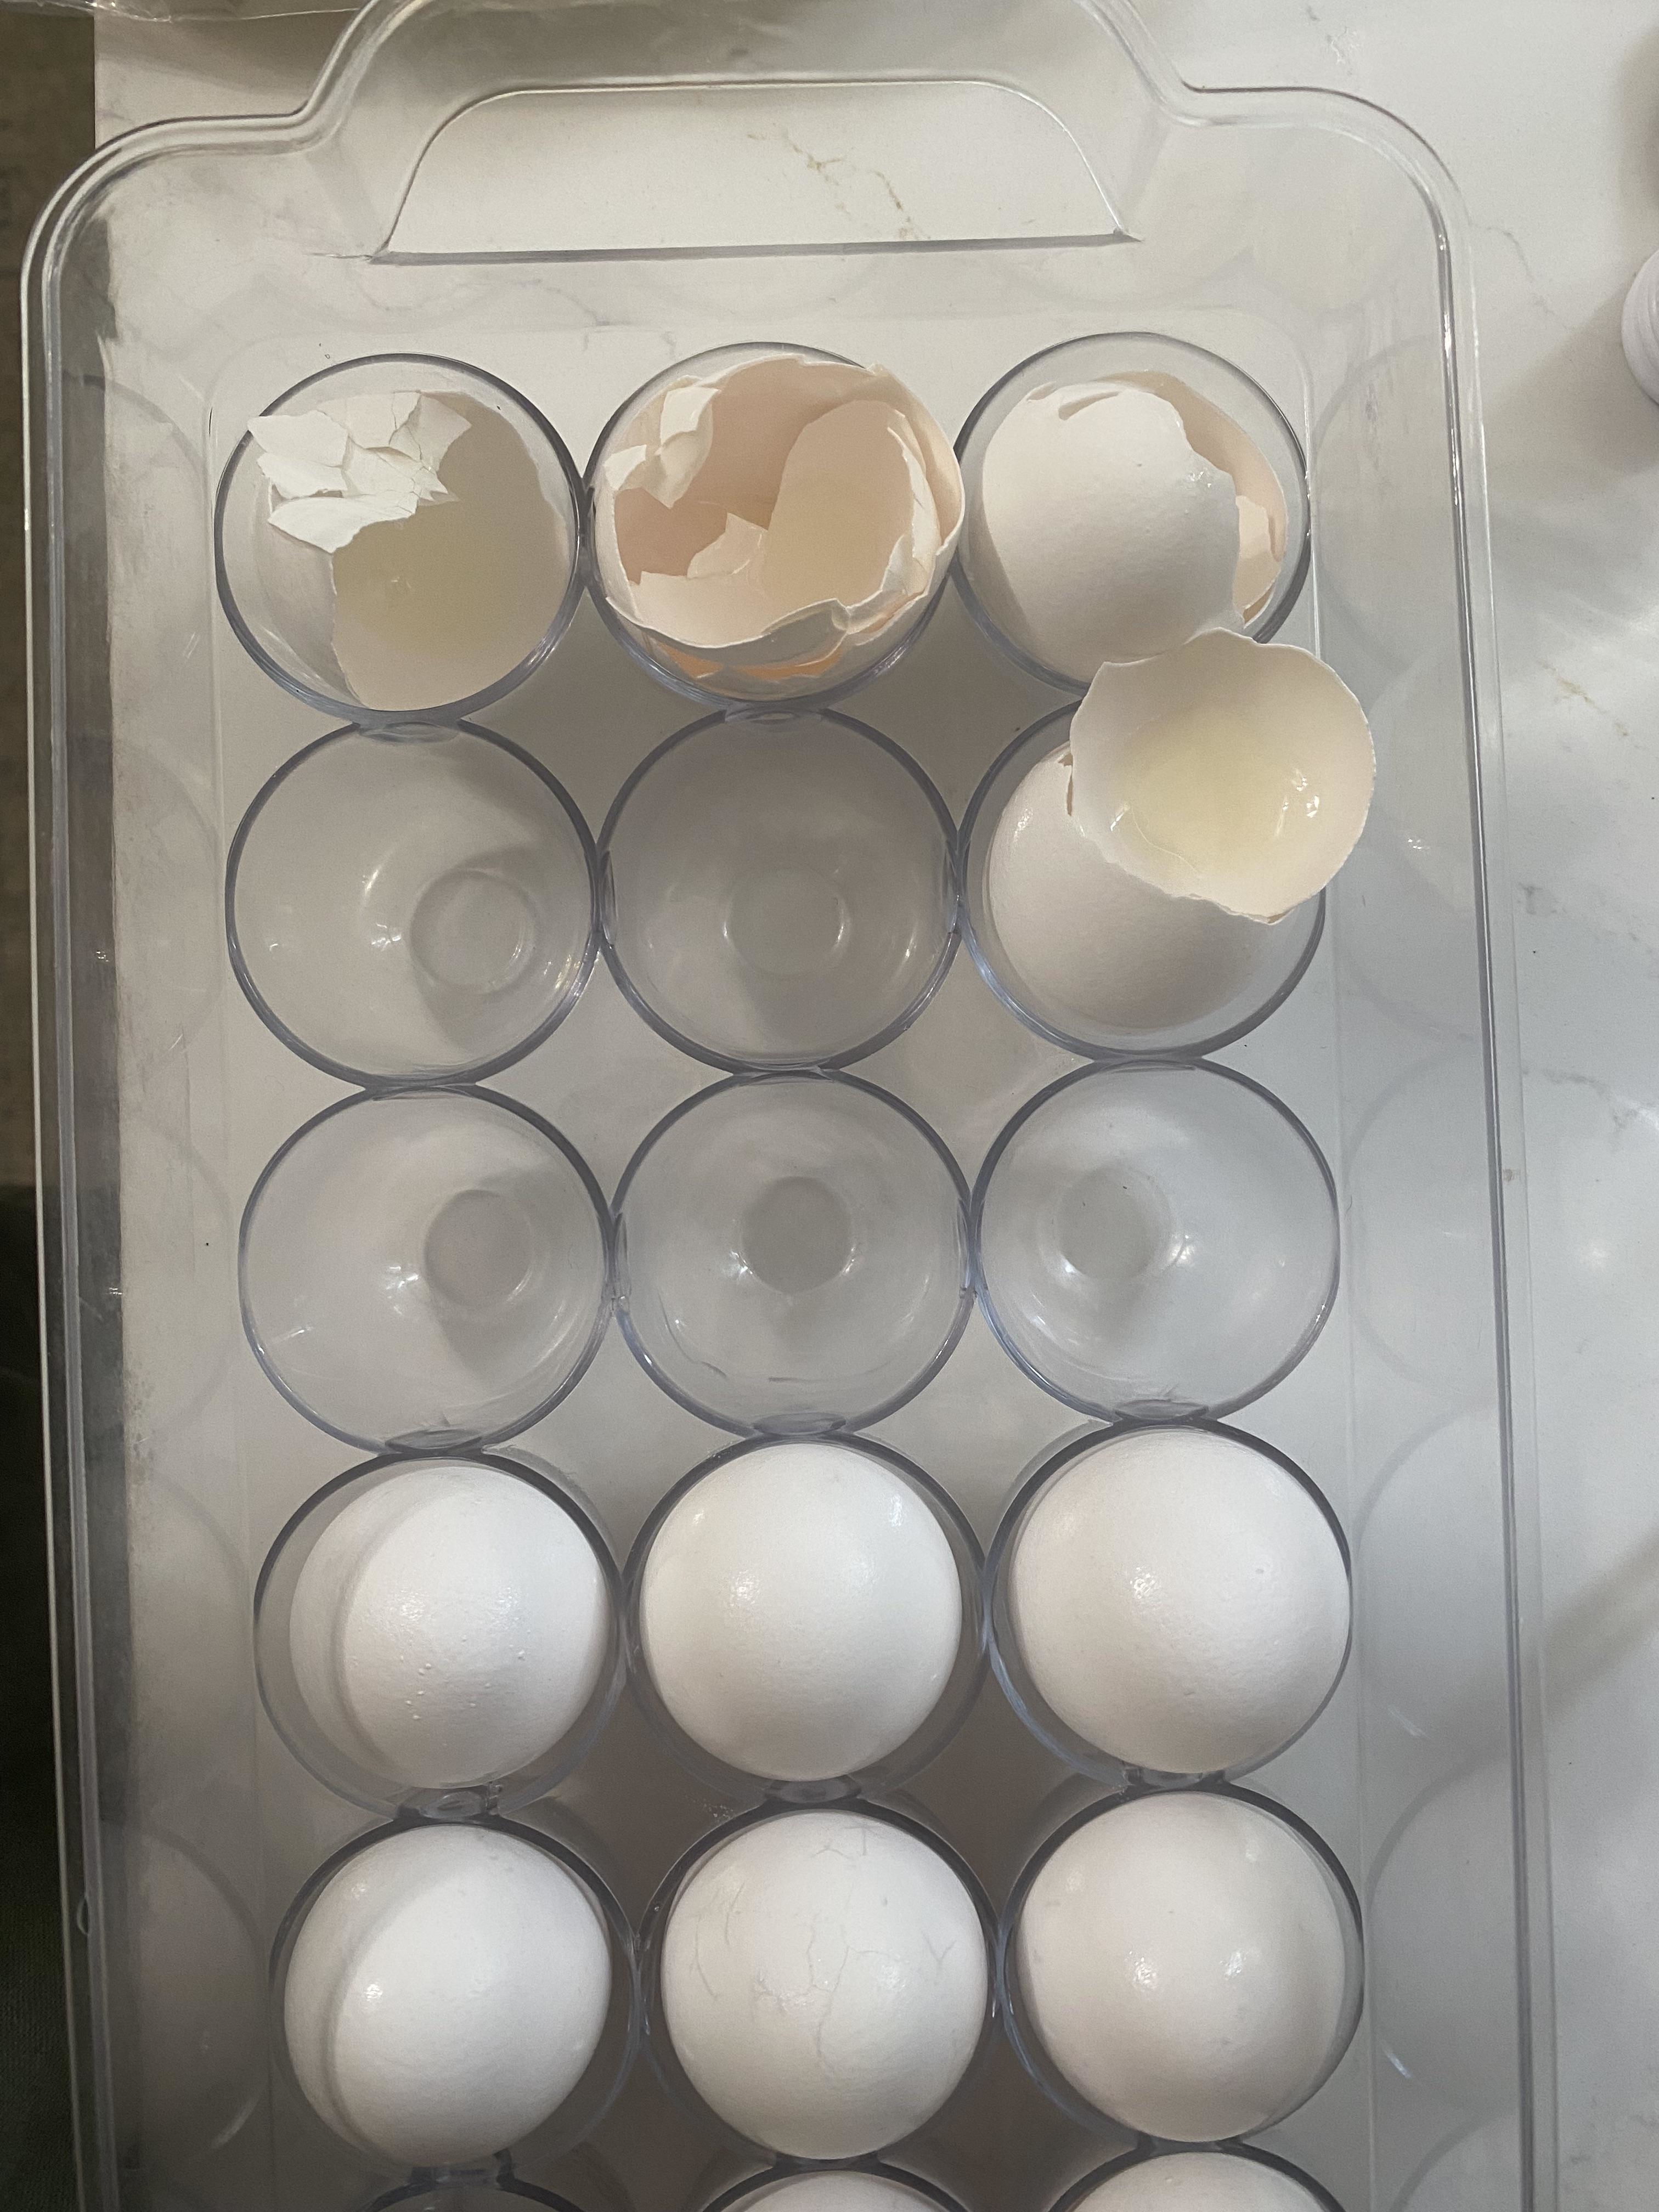 An egg carton with two cracked and four whole eggs at the top; the rest of the slots are empty